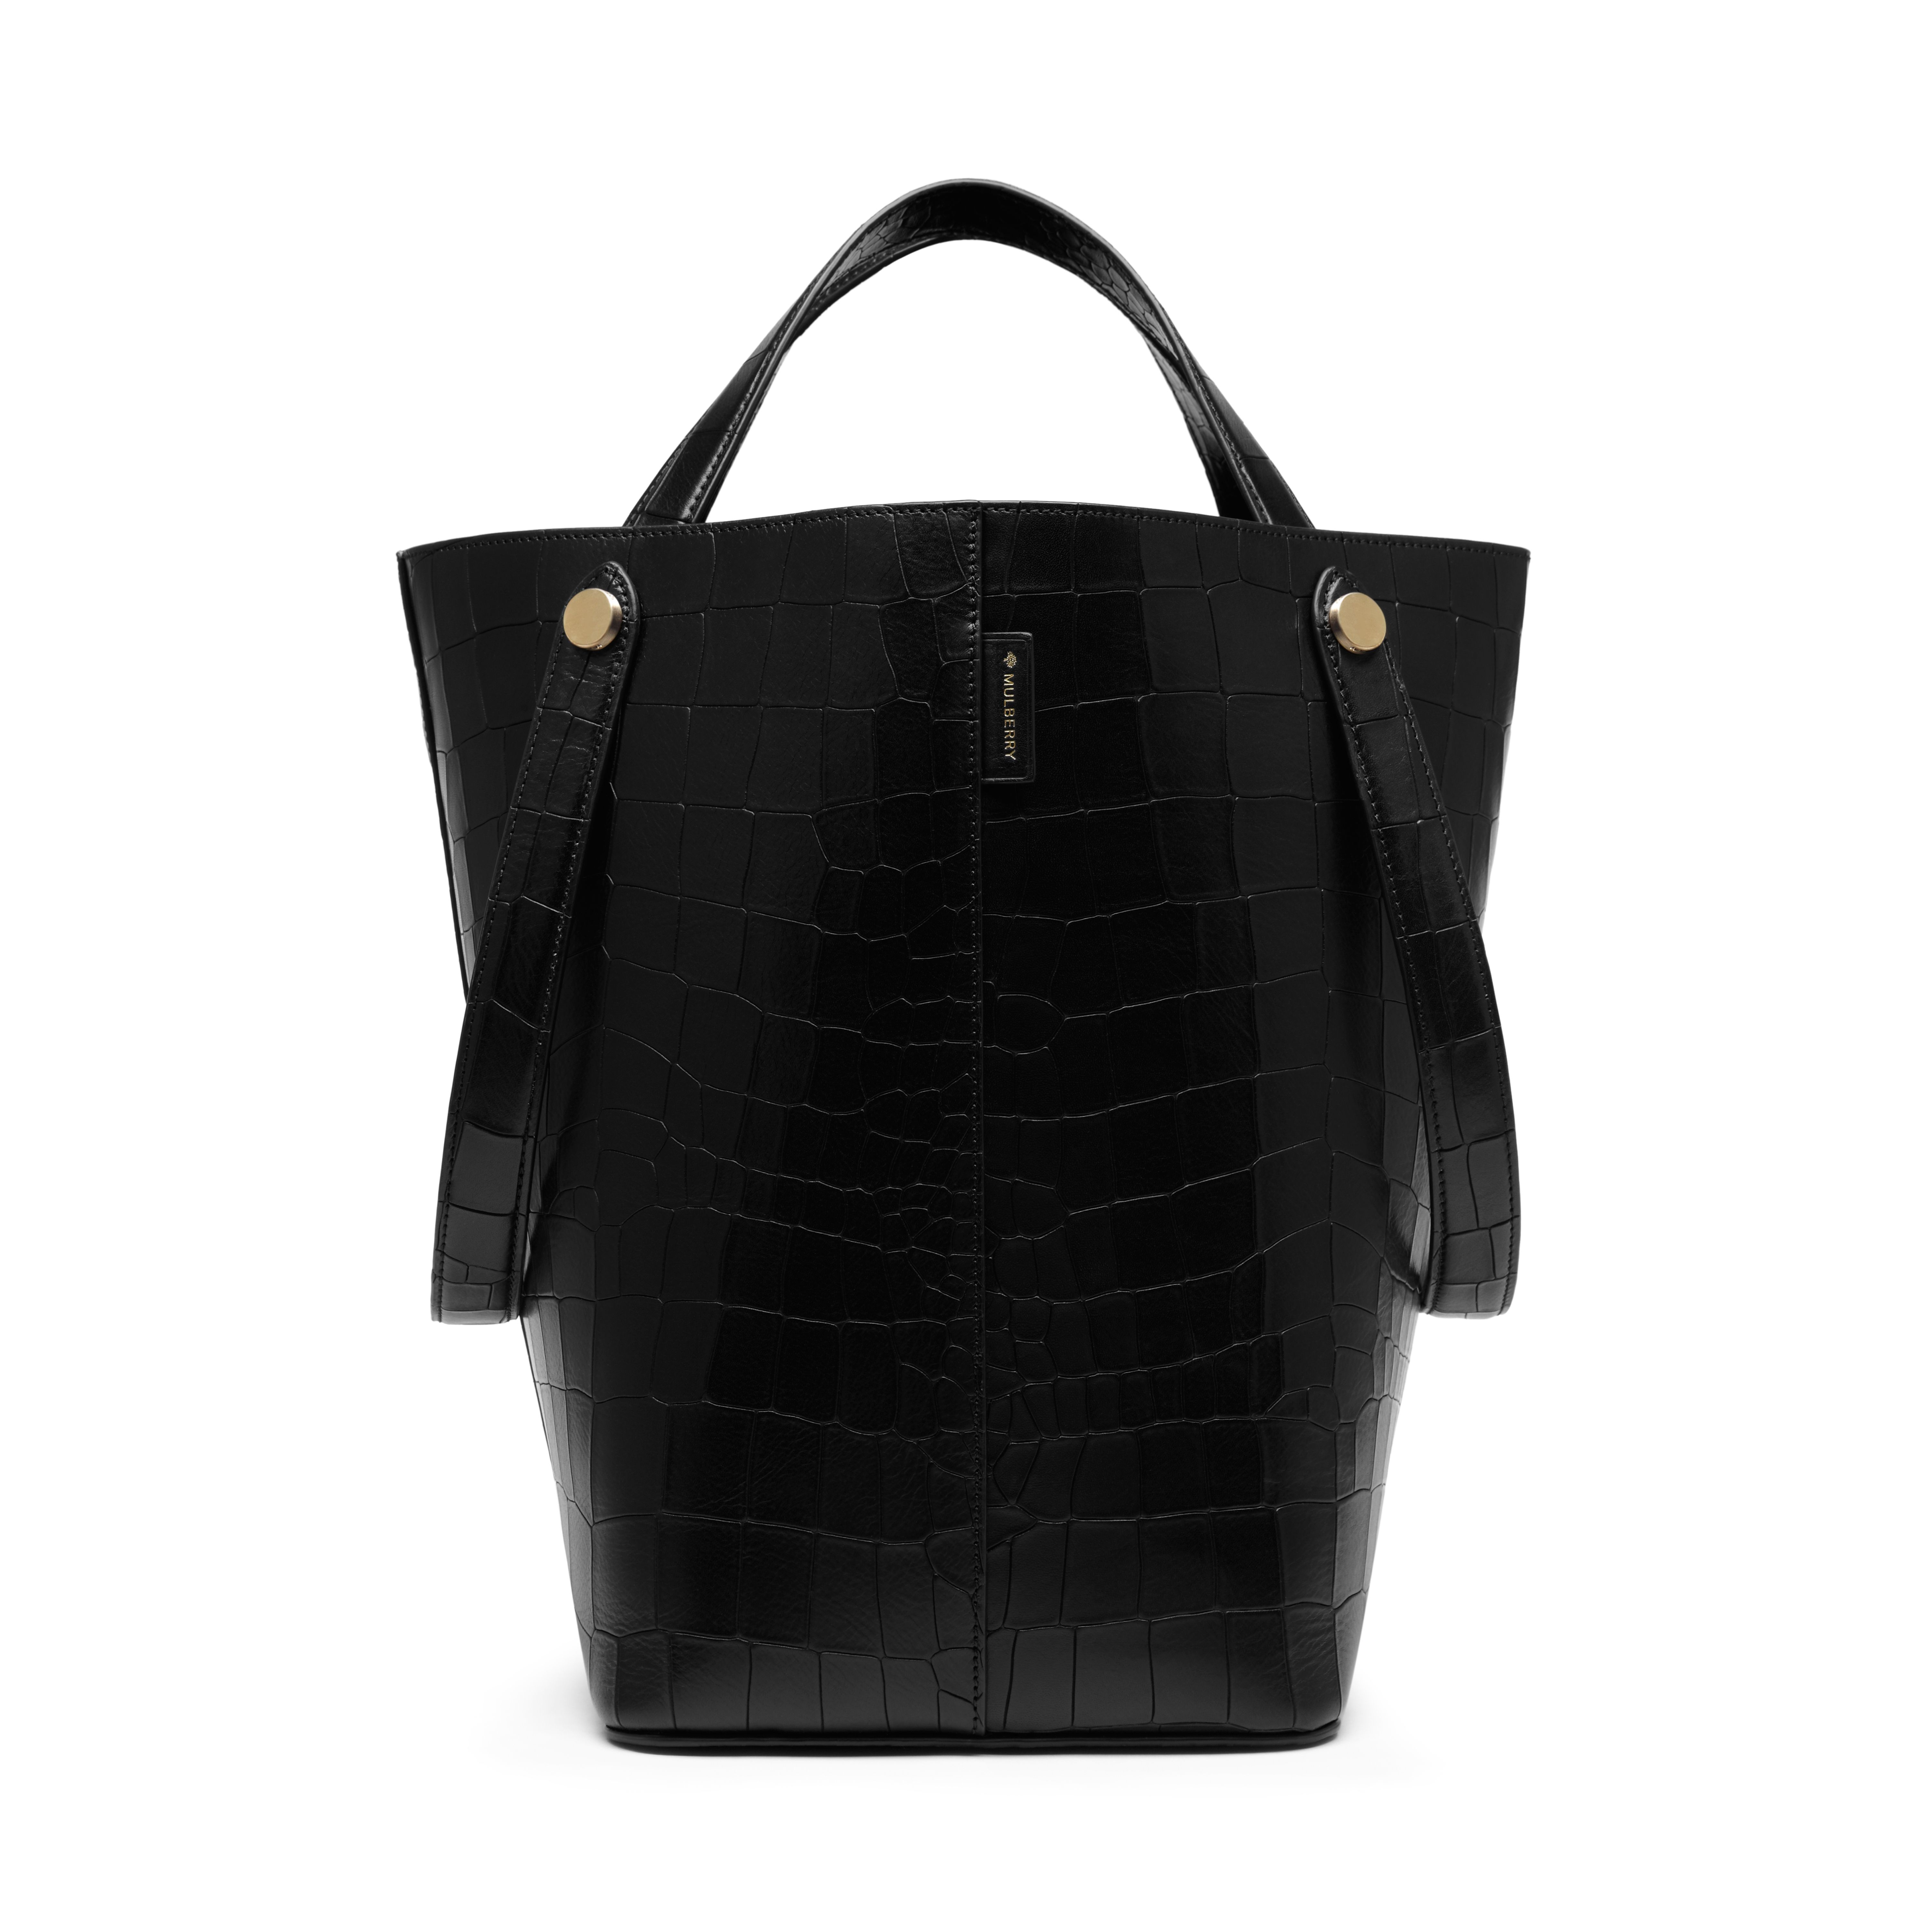 Mulberry Kite Leather Tote in Black - Lyst